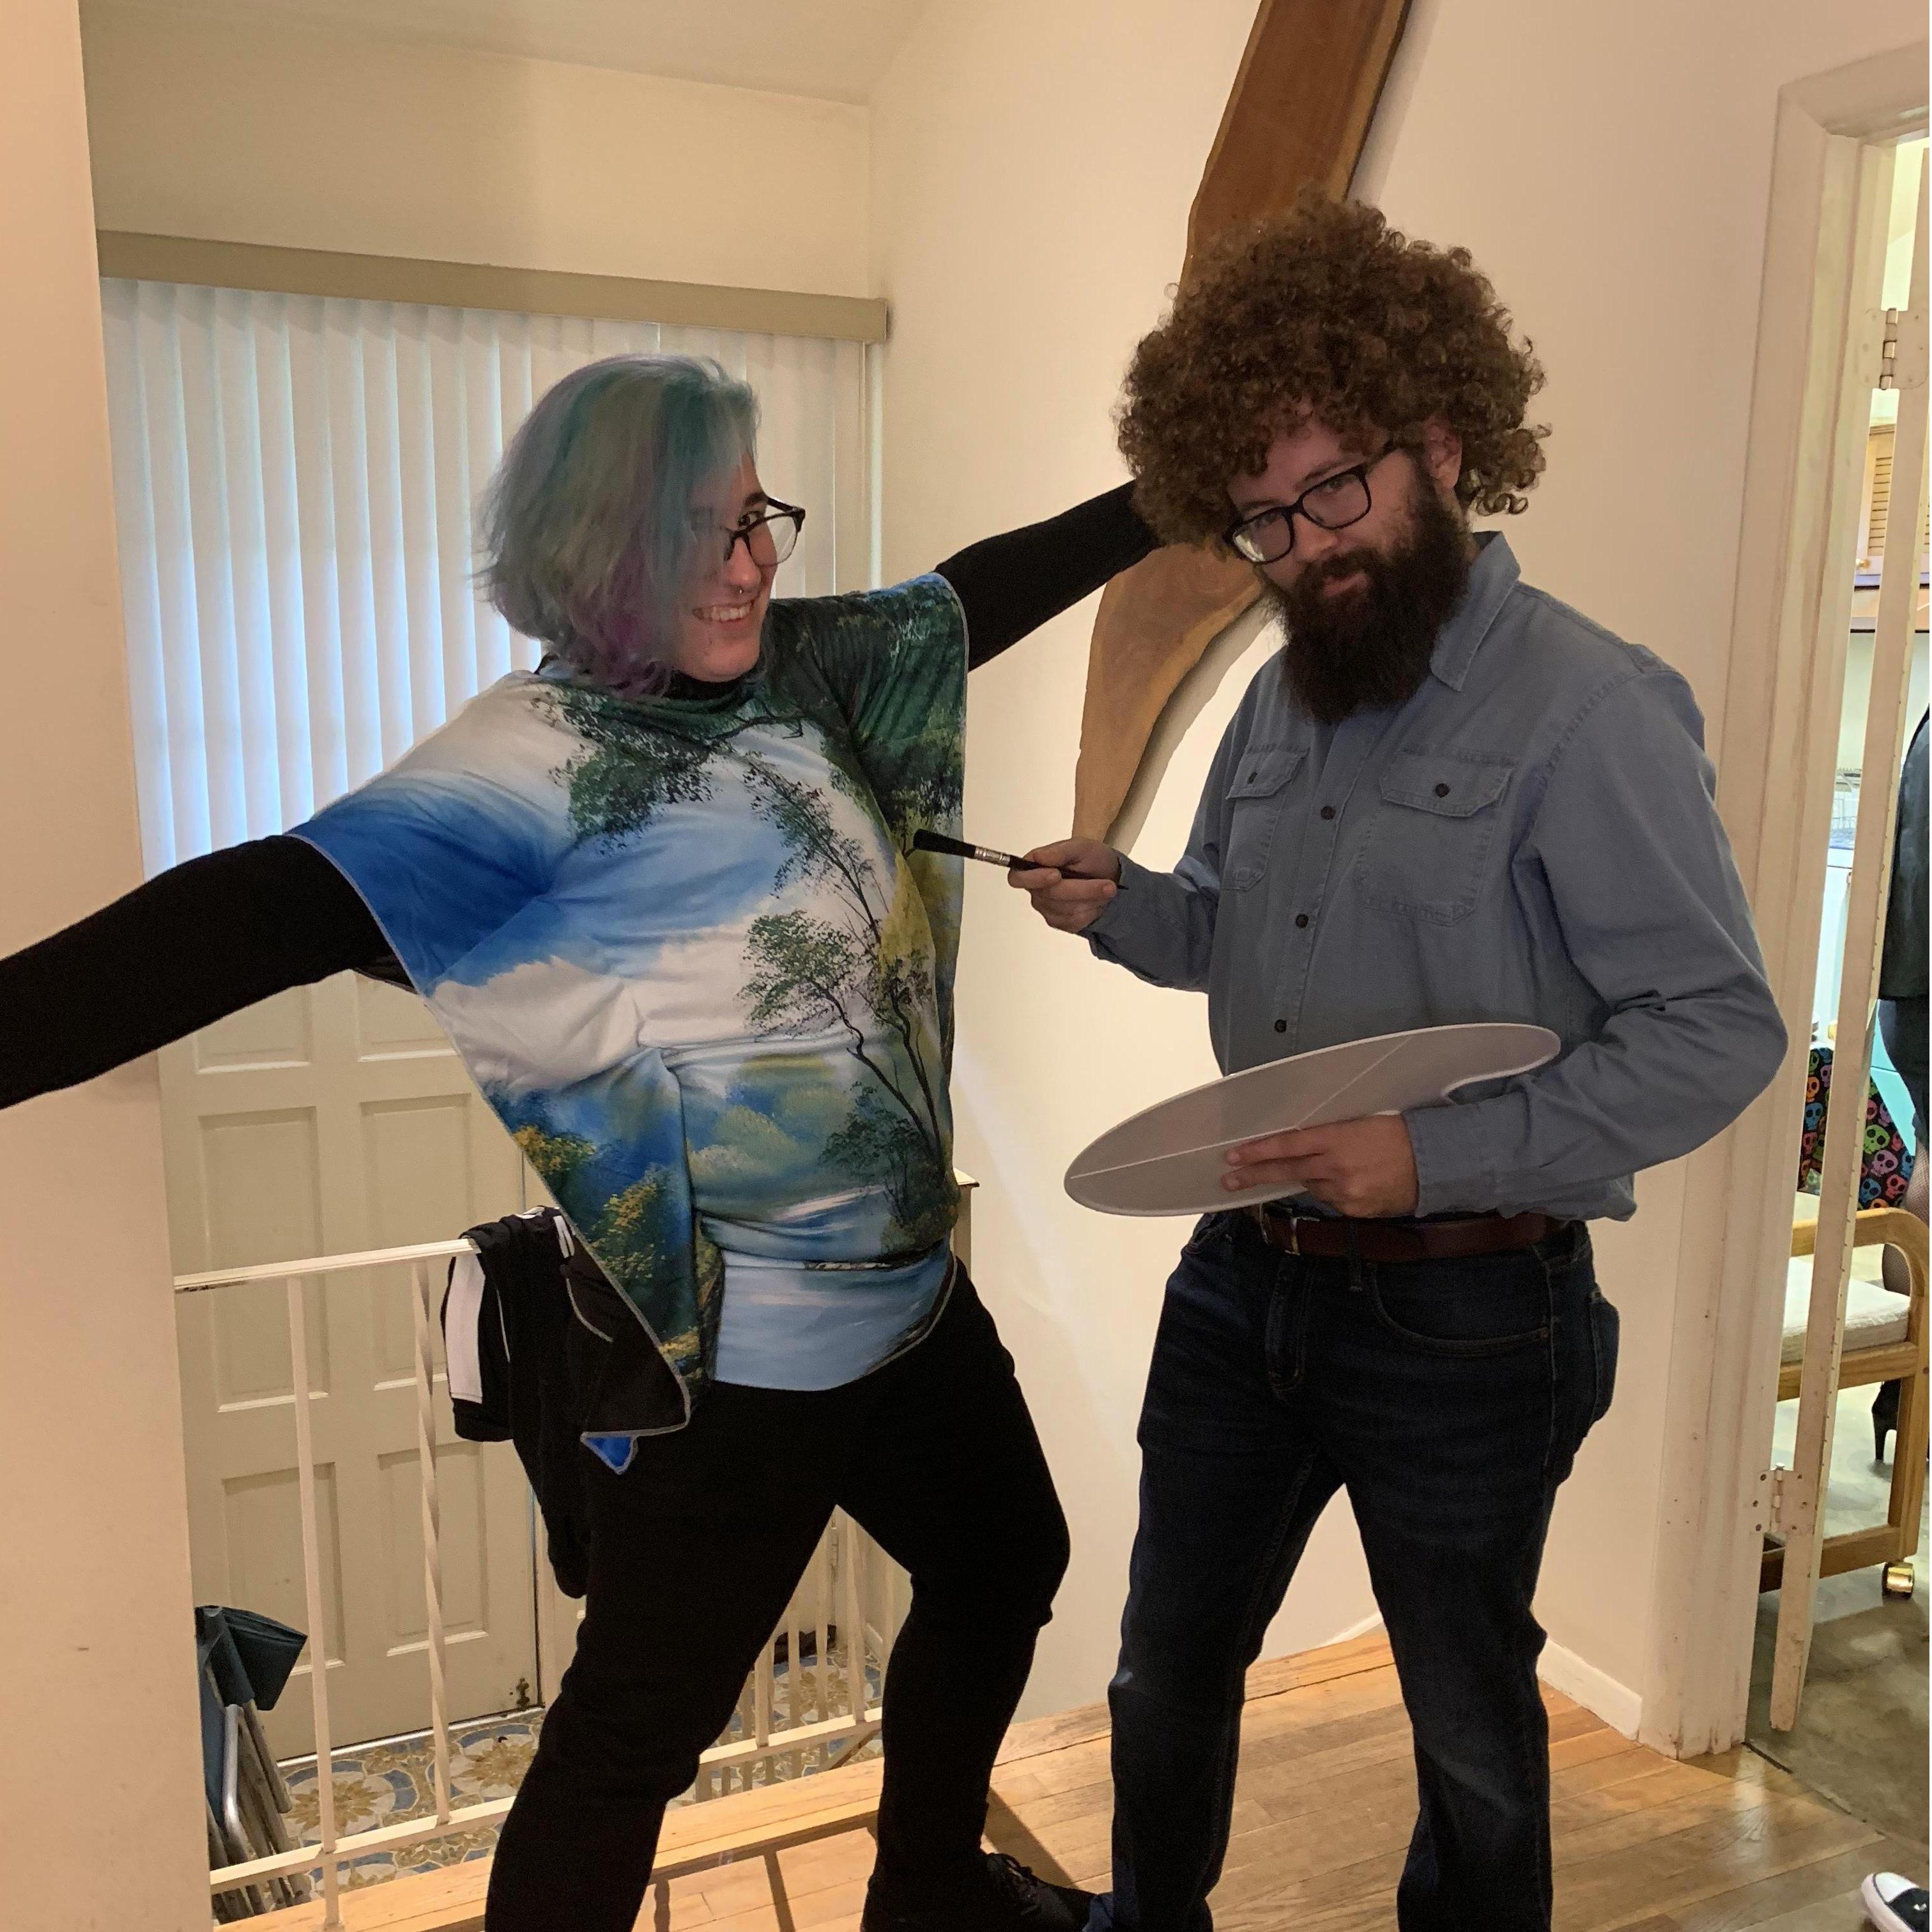 Halloween. Bob Ross and his painting.